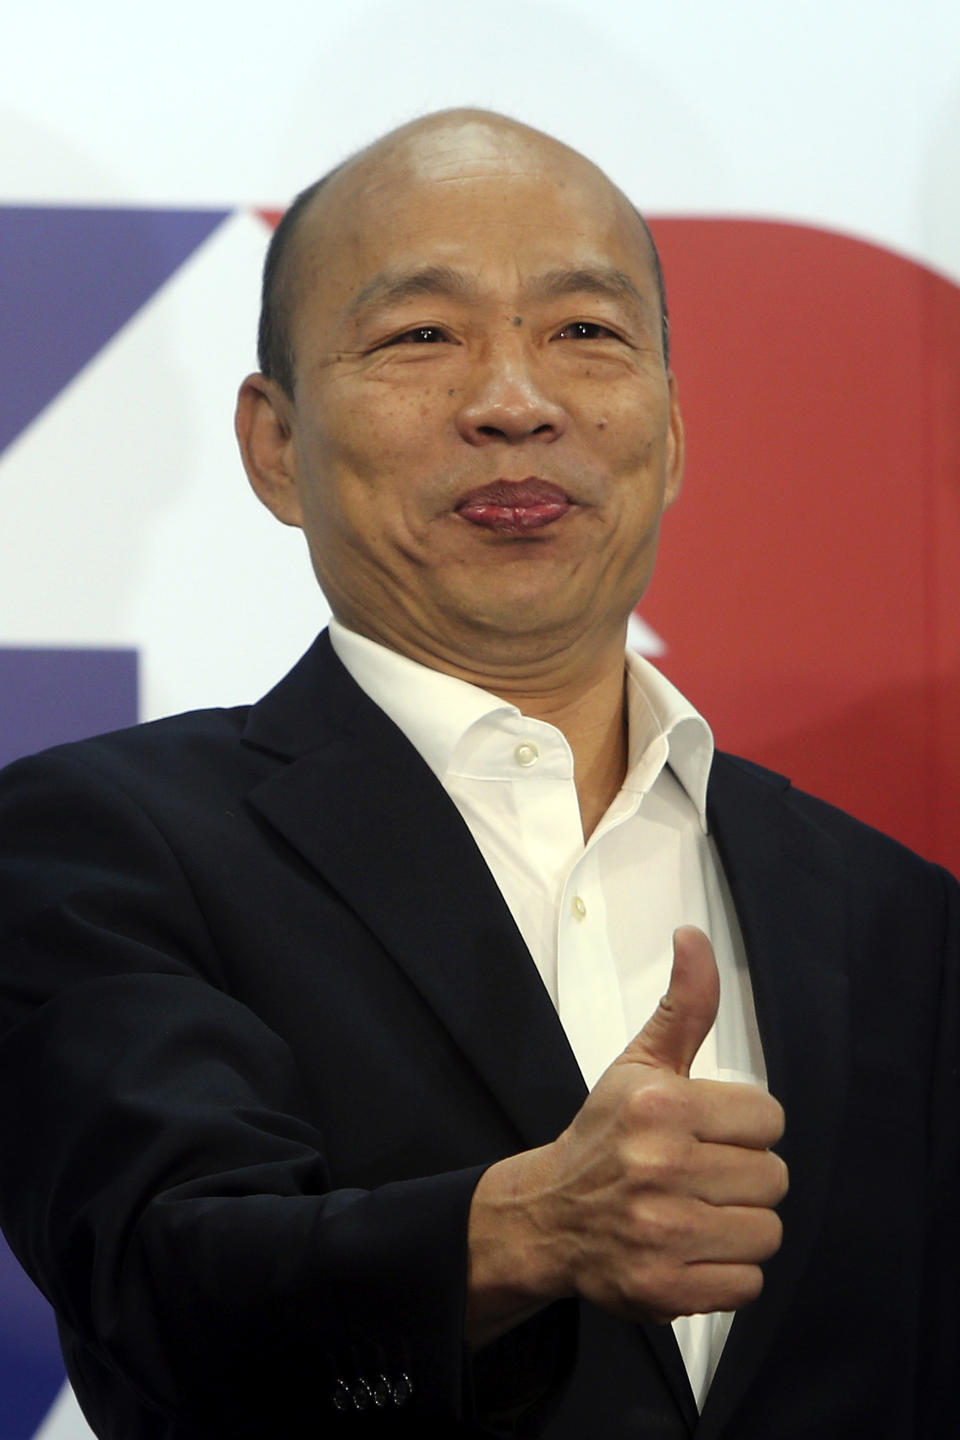 Han Kuo-yu of the Nationalist Party shows a thumbs-up during a media event announcing his campaign logo in Taipei, Taiwan, Thursday, Nov. 14, 2019. The China-friendly opposition candidate in Taiwan’s upcoming presidential election is urging Hong Kong to adopt universal suffrage as the best way of stemming months of anti-government protests. (AP Photo/Chiang Ying-ying)